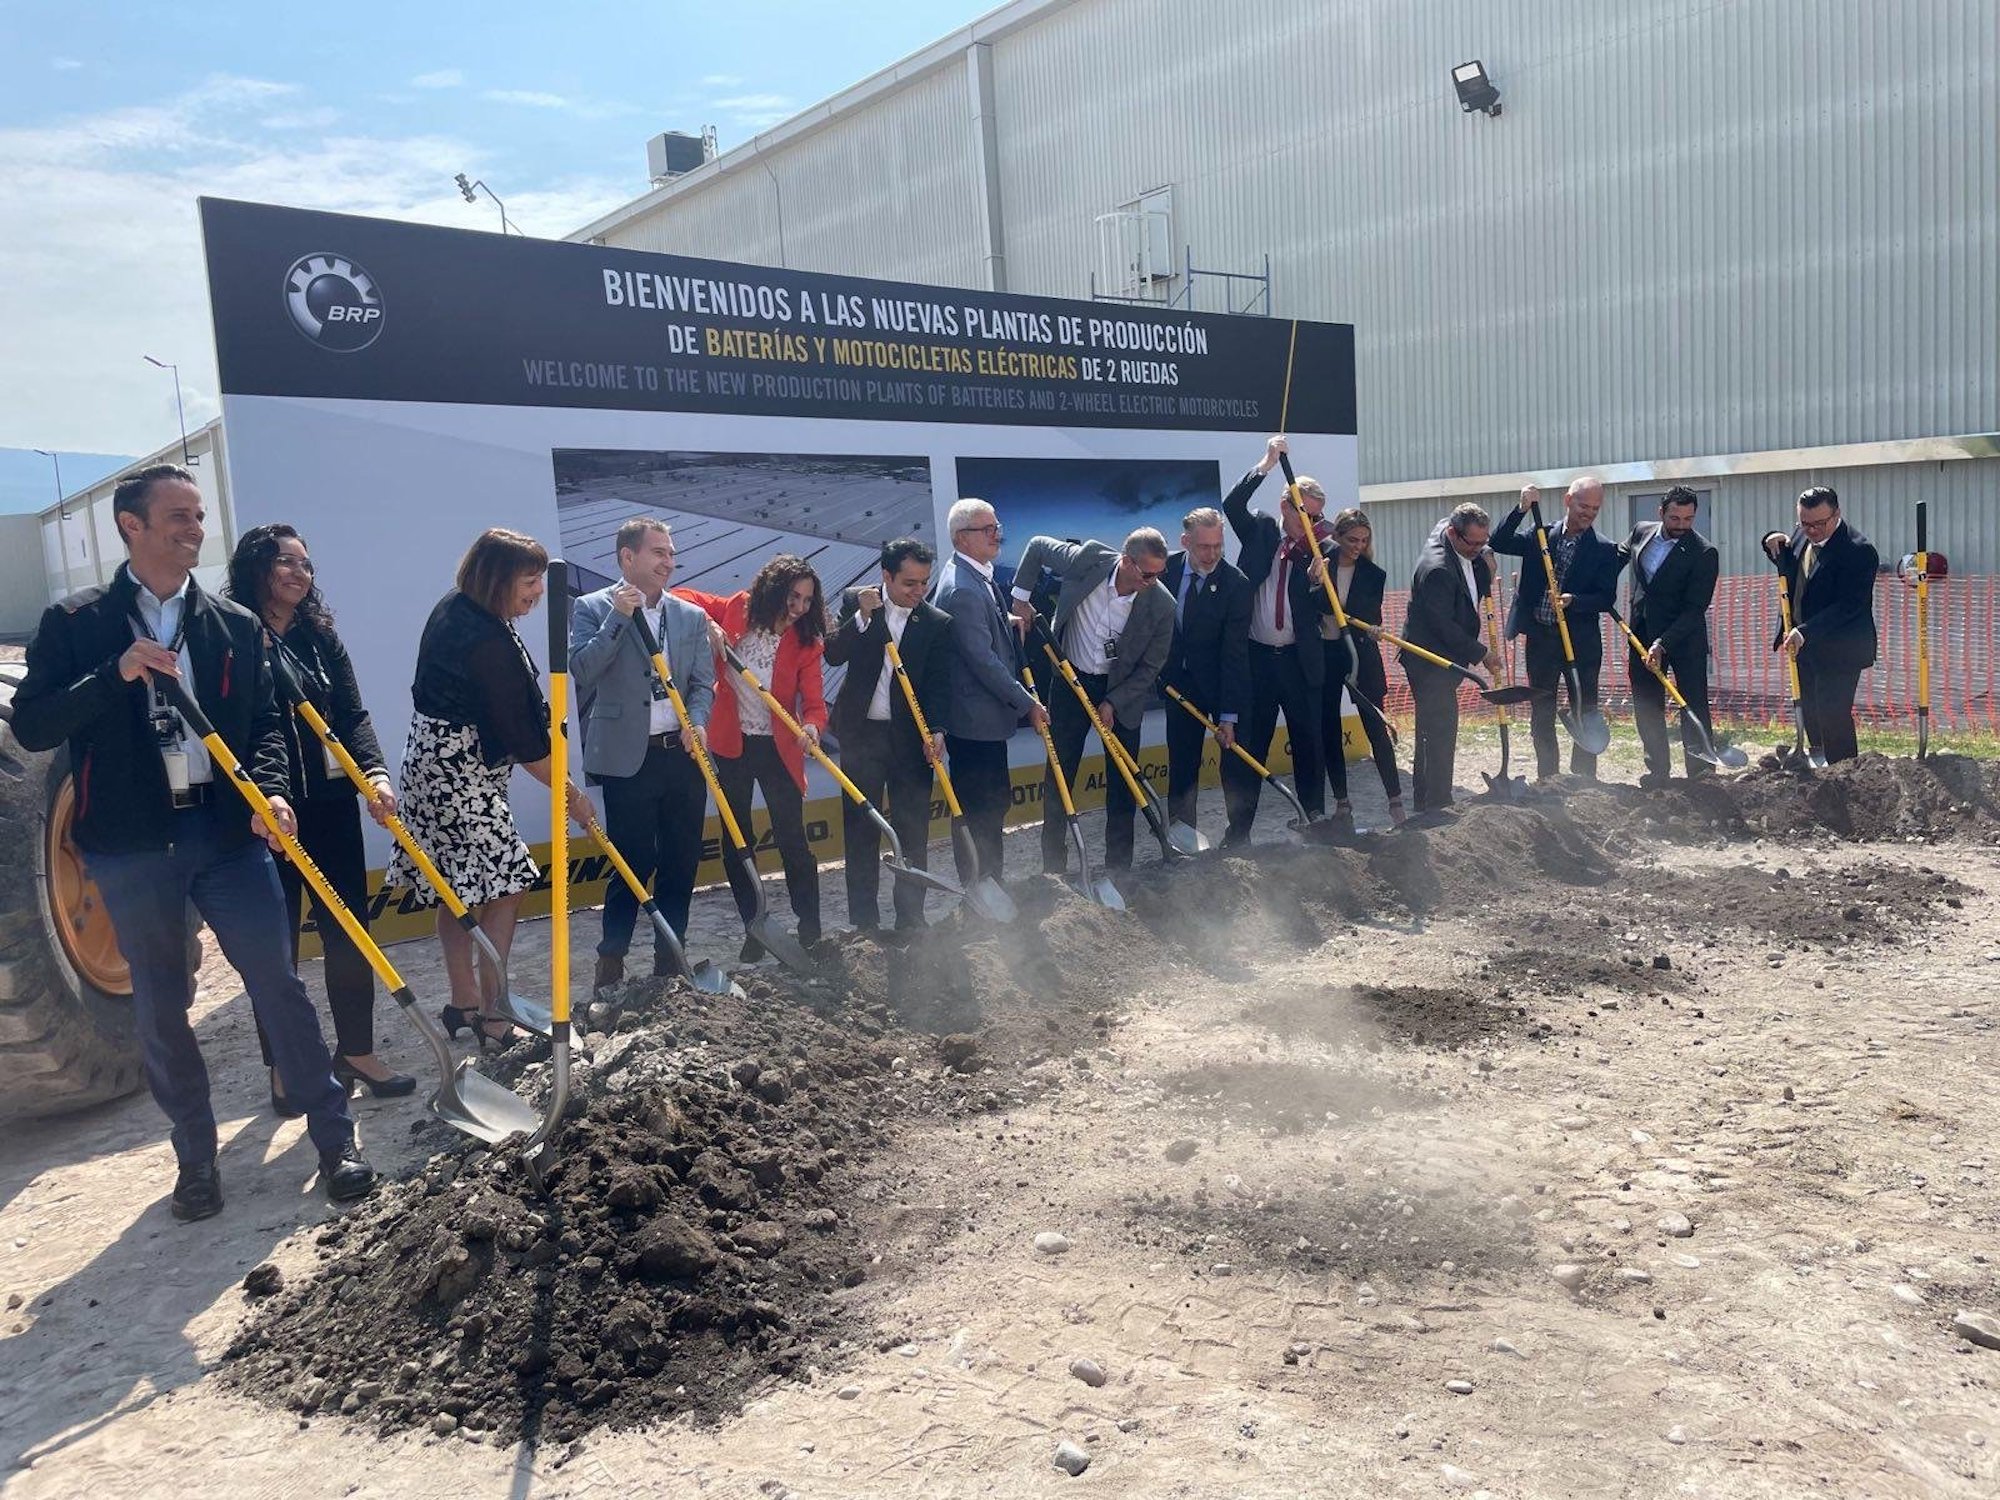 Relevant parties breaking ground in commemoration of the new EV plant beginning construction for Can-Am's Origin and Pulse. Media sourced from BRP's press release.